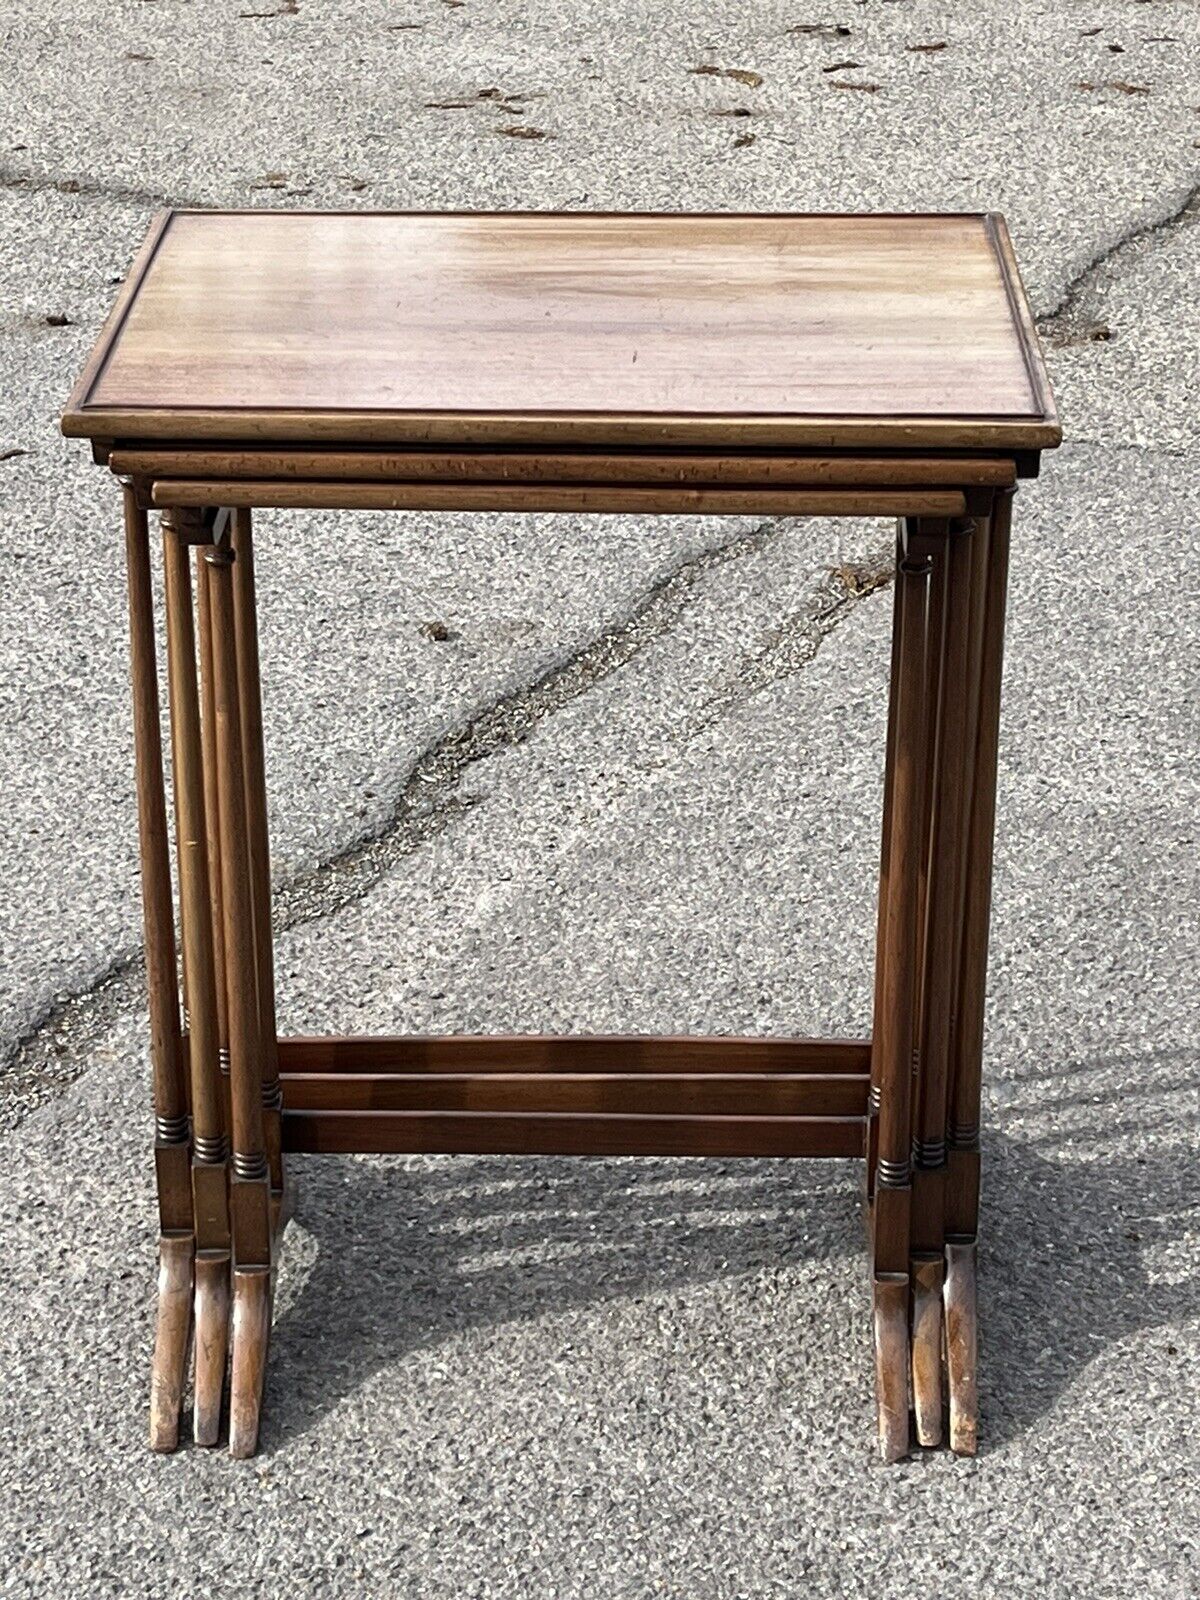 Victorian Mahogany Nest Of 3 Tables, Perfect Coffee / Lamp Tables